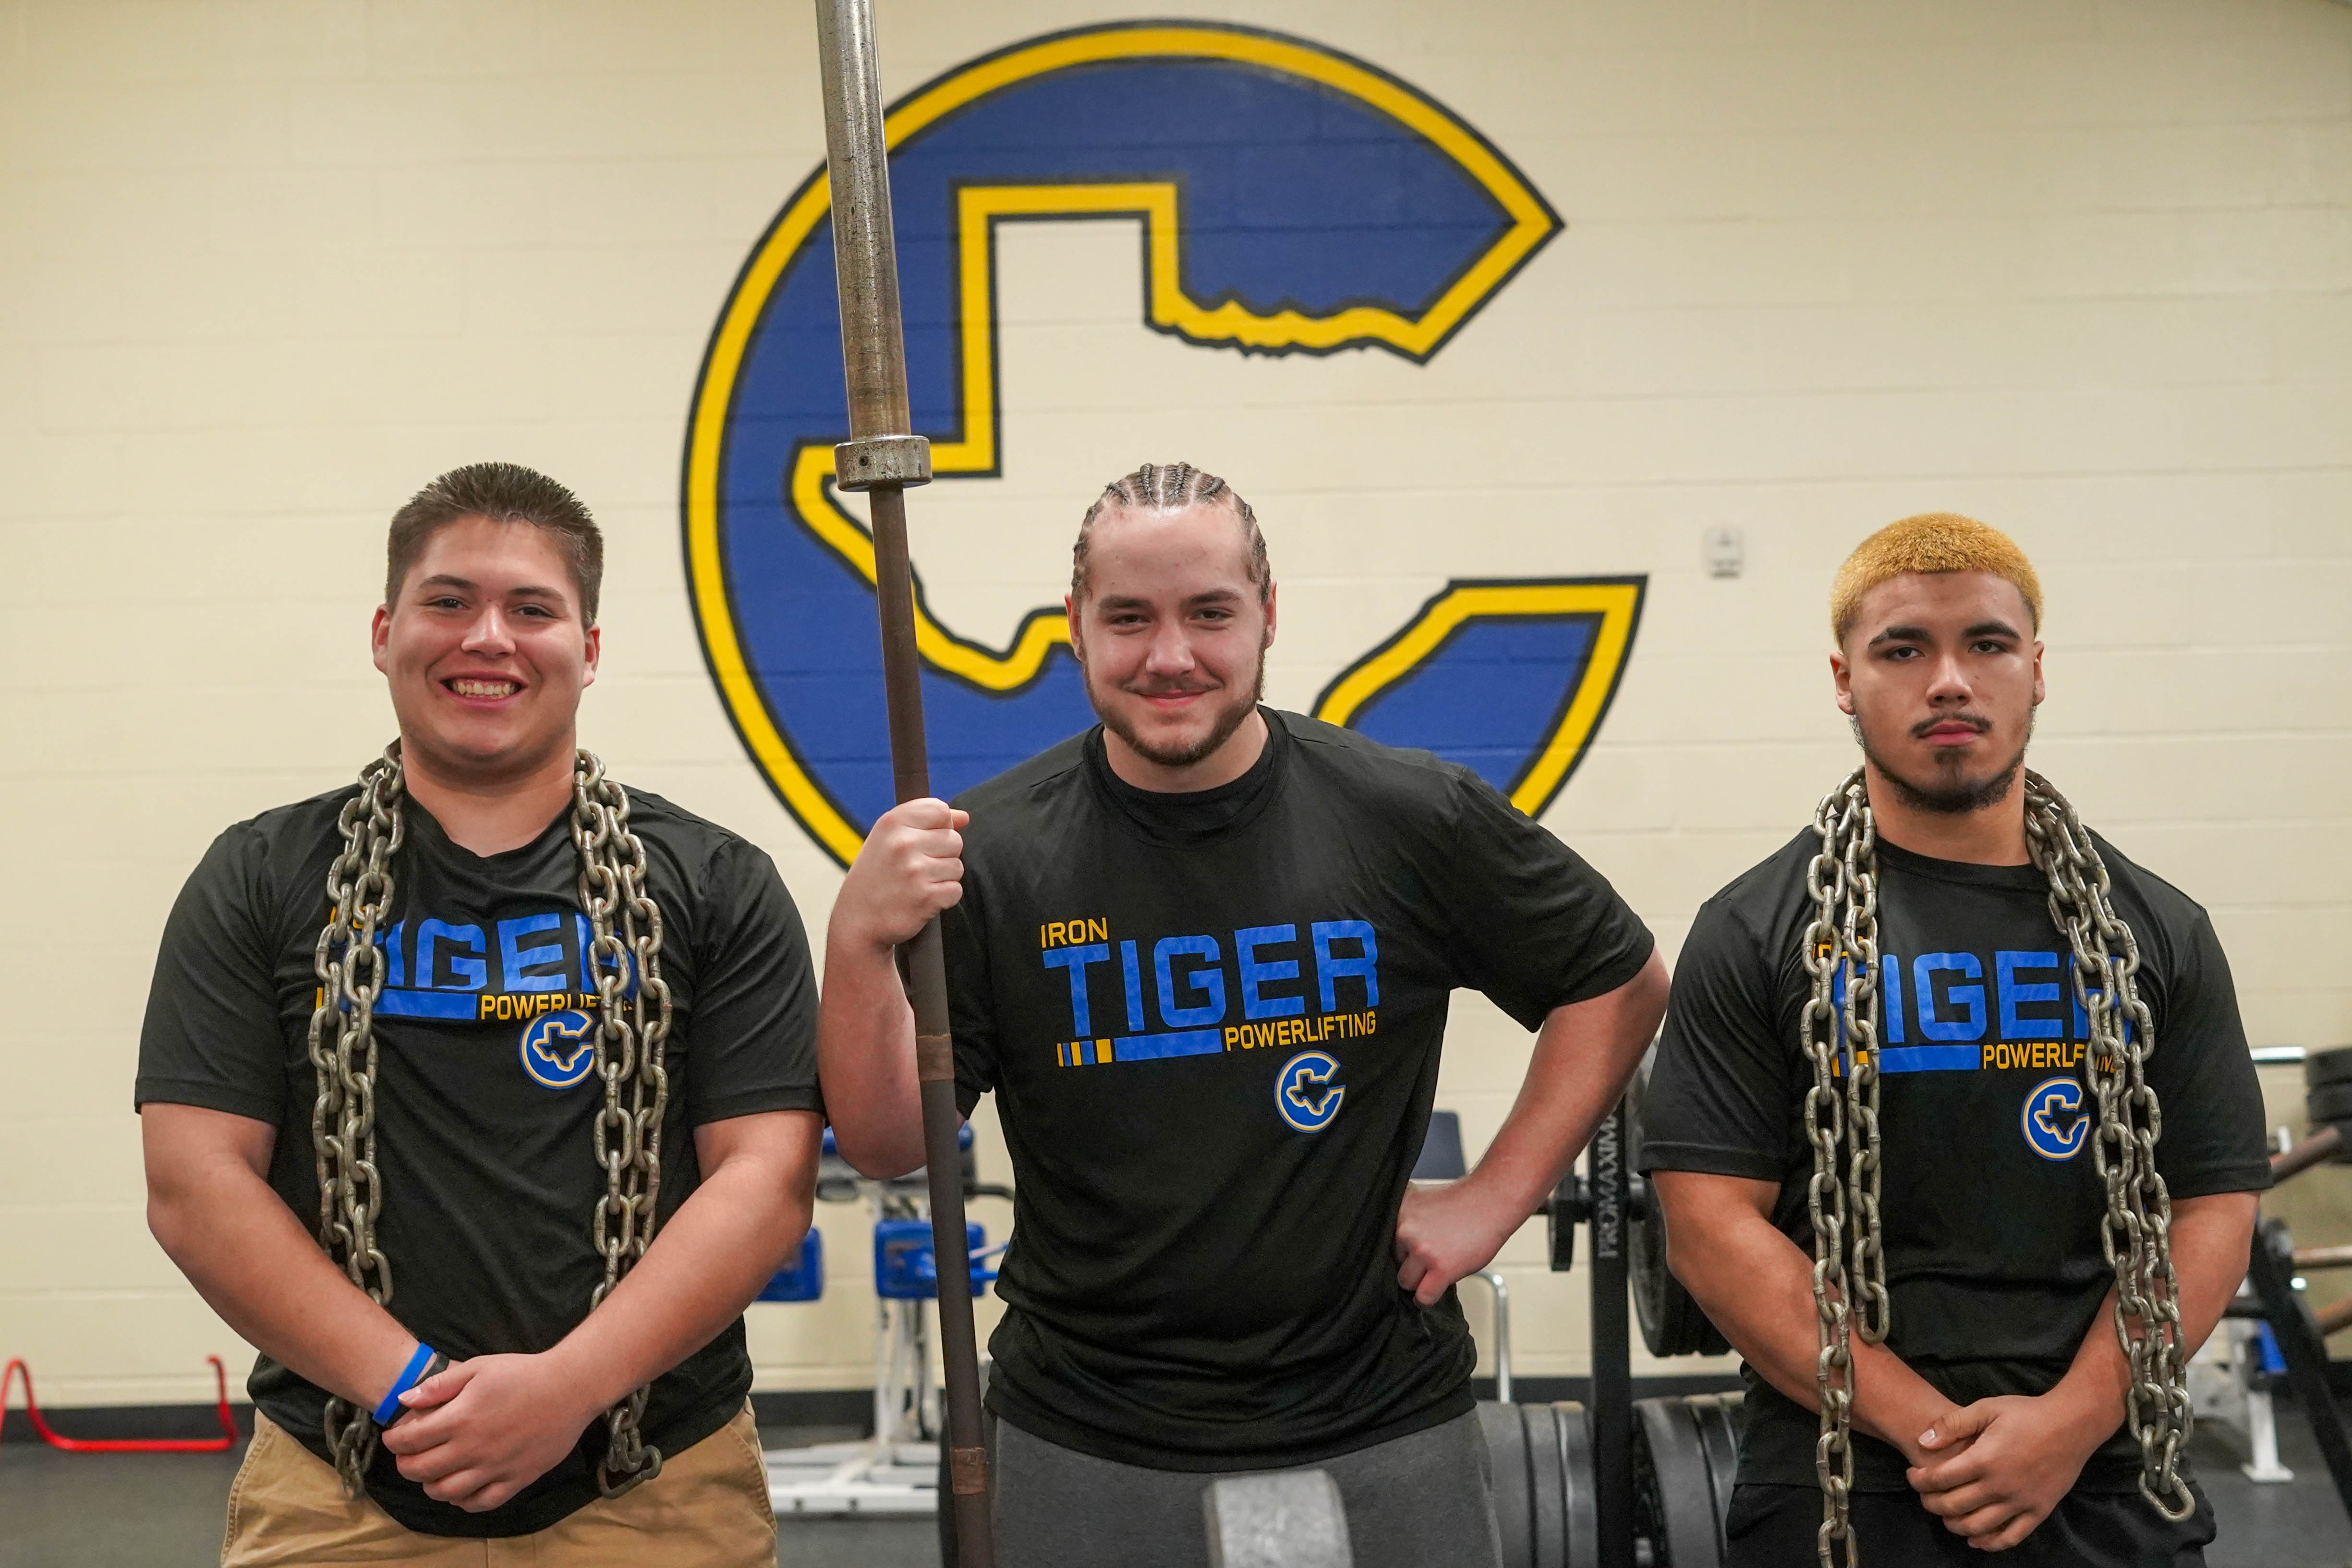  Iron Tigers headed to state powerlifting meet 